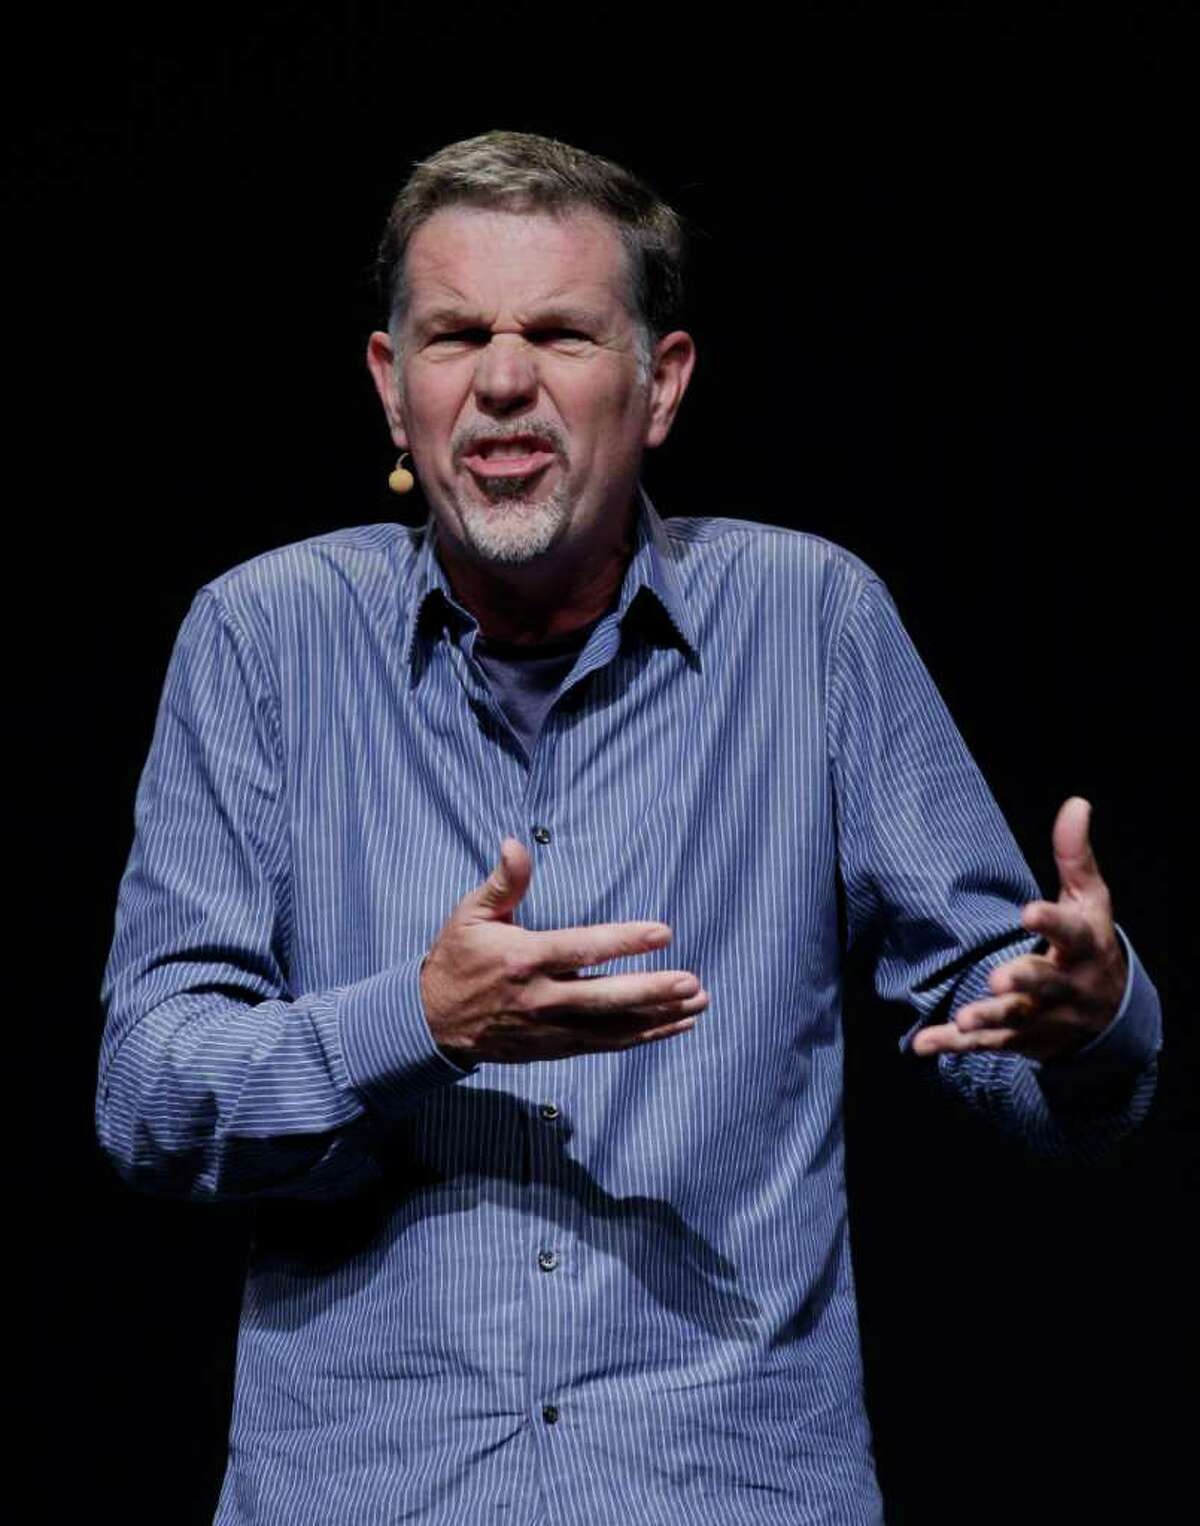 FILE - In this Sept. 23, 2011 file photo, Netflix CEO Reed Hastings gestures during the Facebook f/8 conference in San Francisco. To hear Hastings tell it, the bone-headed decisions that have dragged down the Internet's leading video subscription service during the past five months eventually will be forgotten like a bad movie made by a great film director.(AP Photo/Paul Sakuma, File)